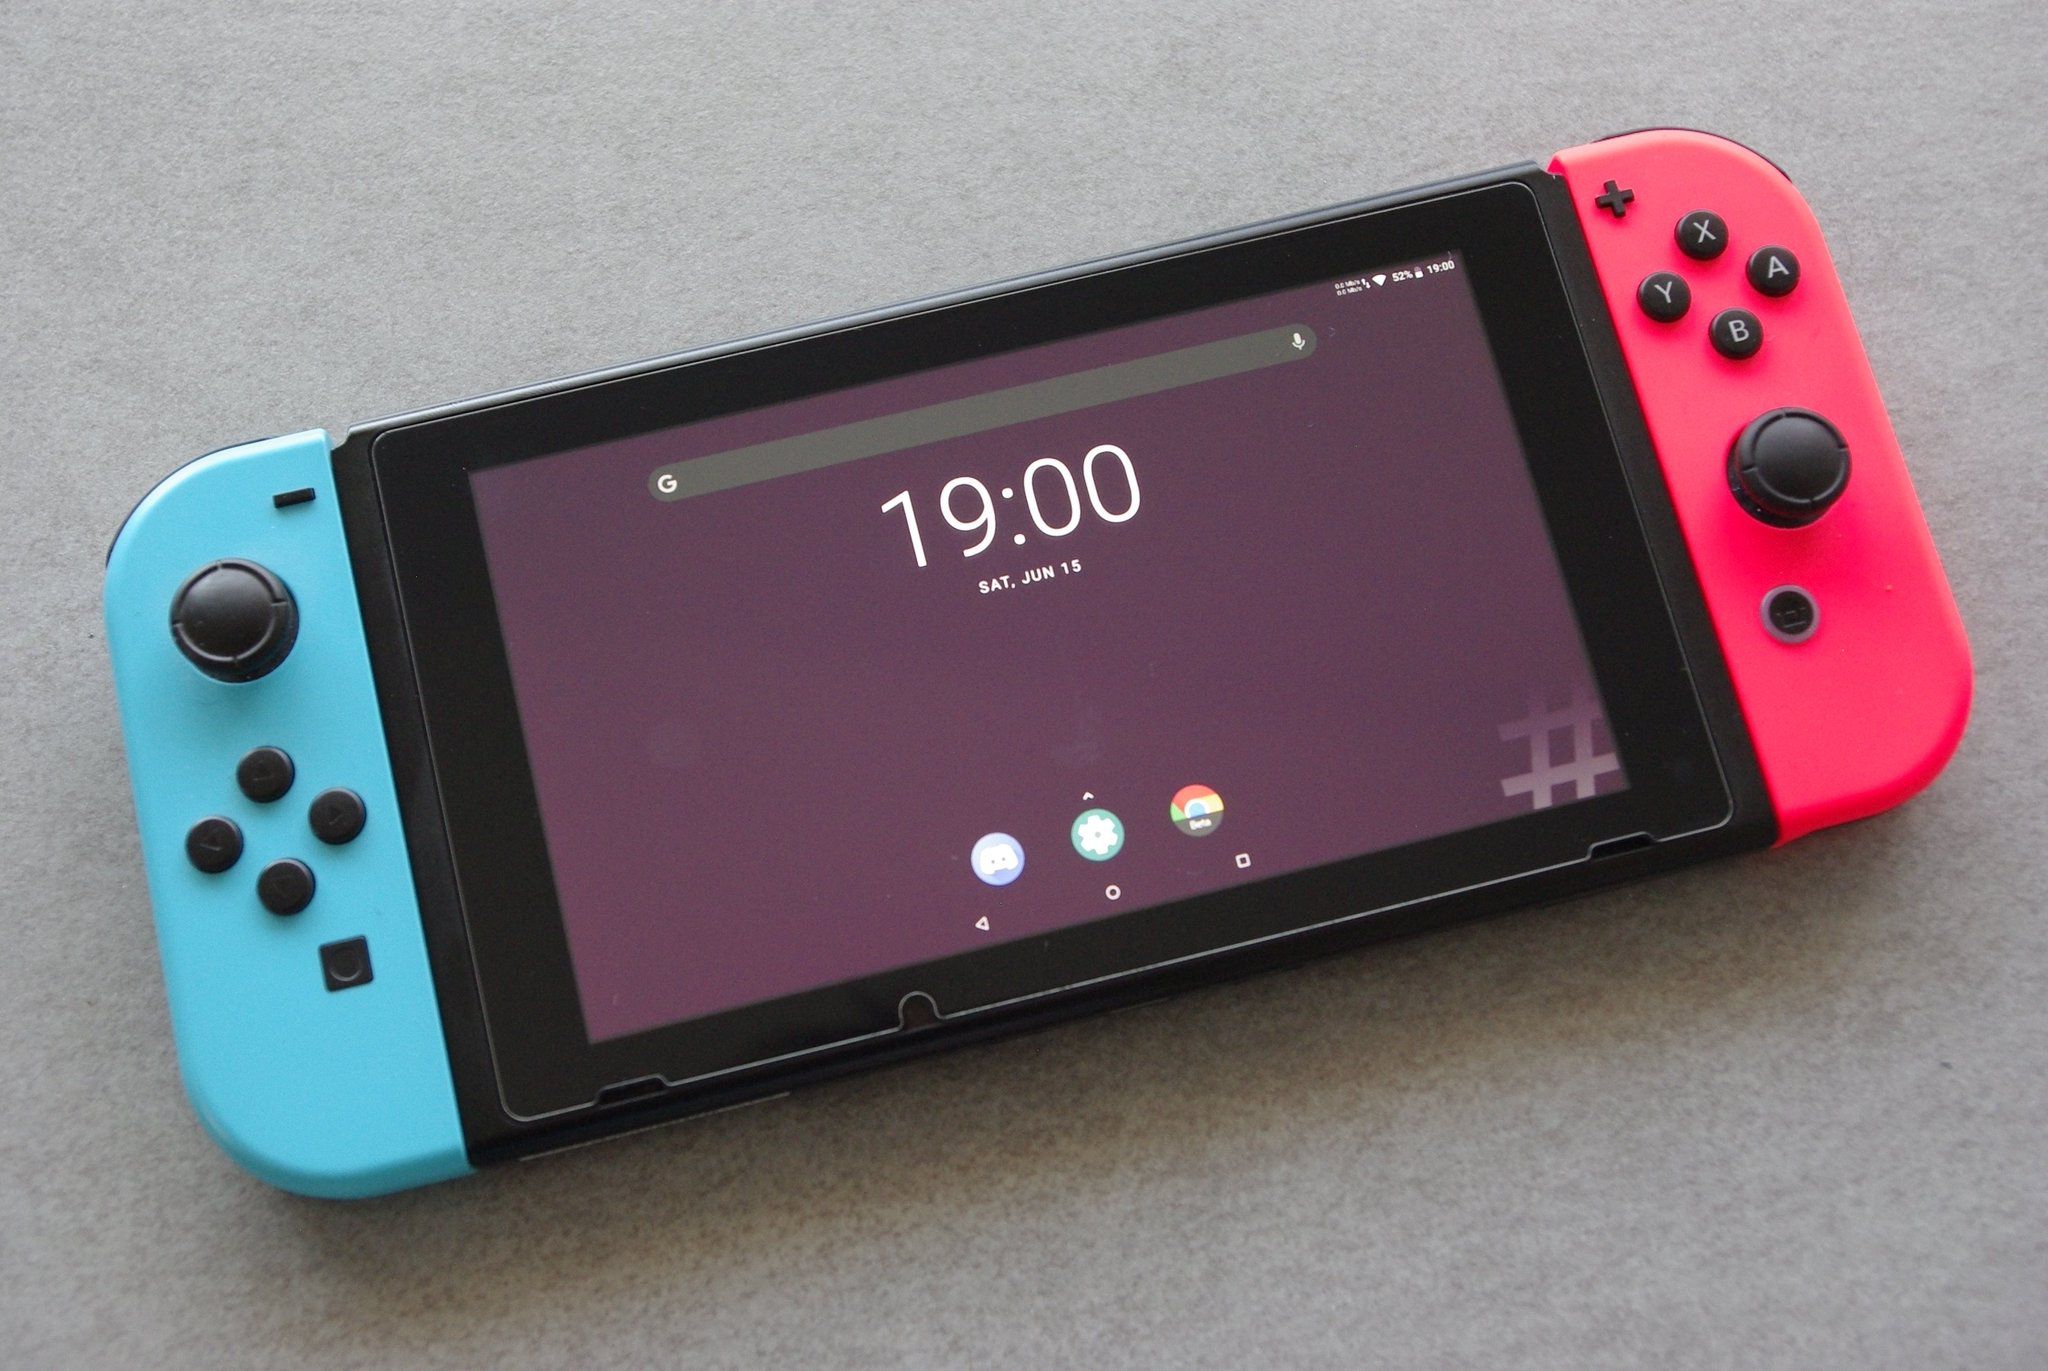 Nintendo Switch Android emulator spotted online